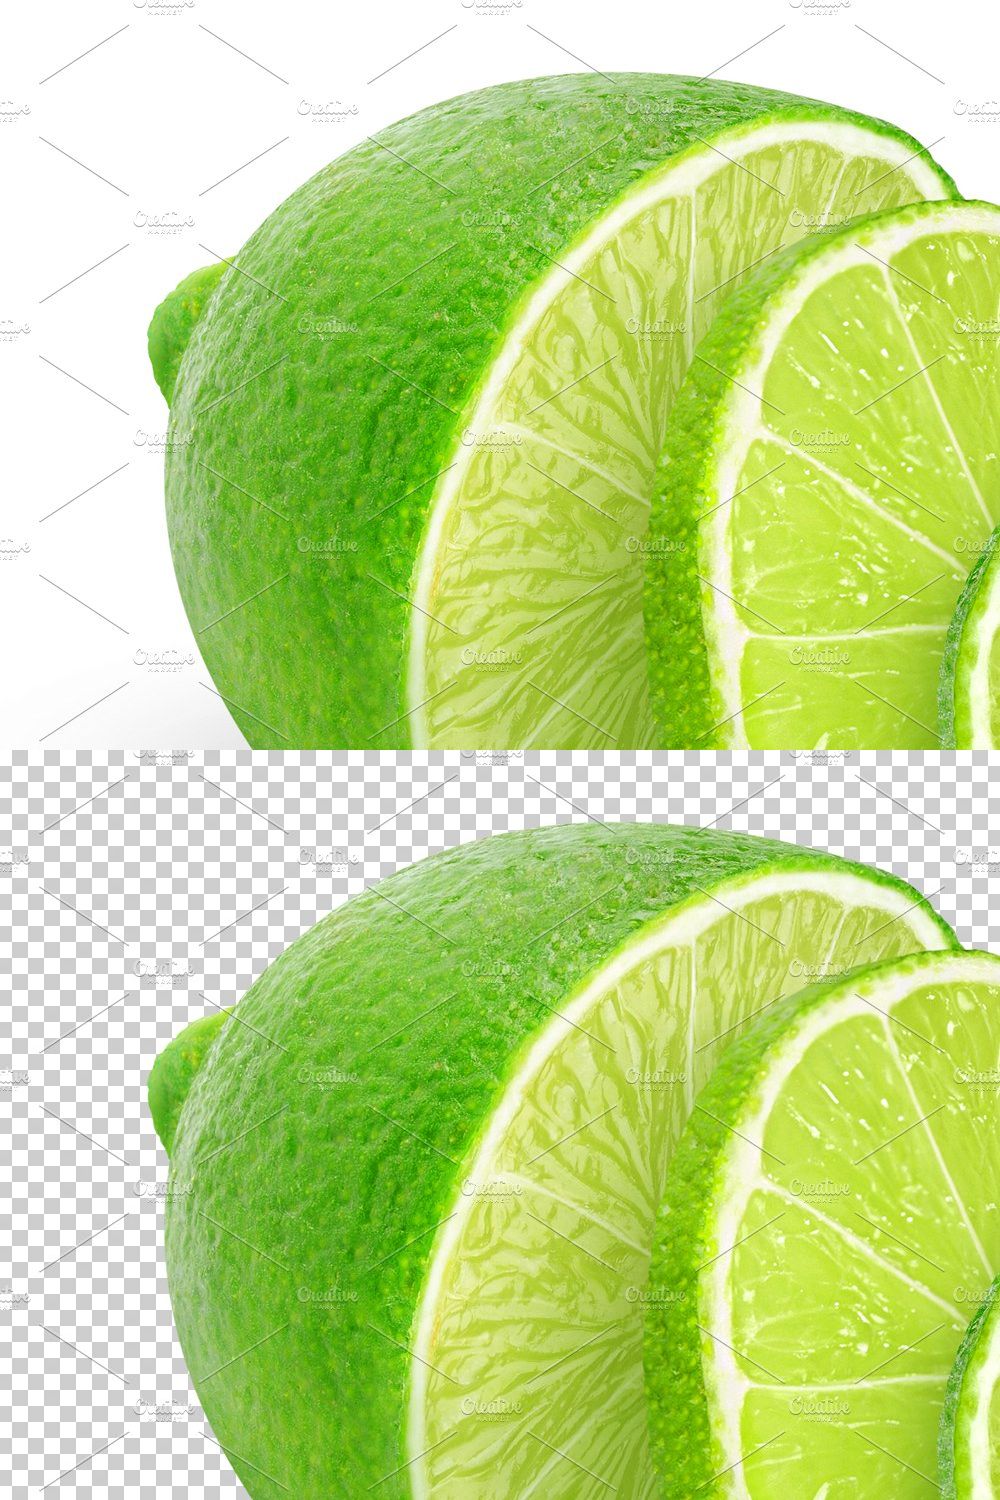 Sliced lime pinterest preview image.